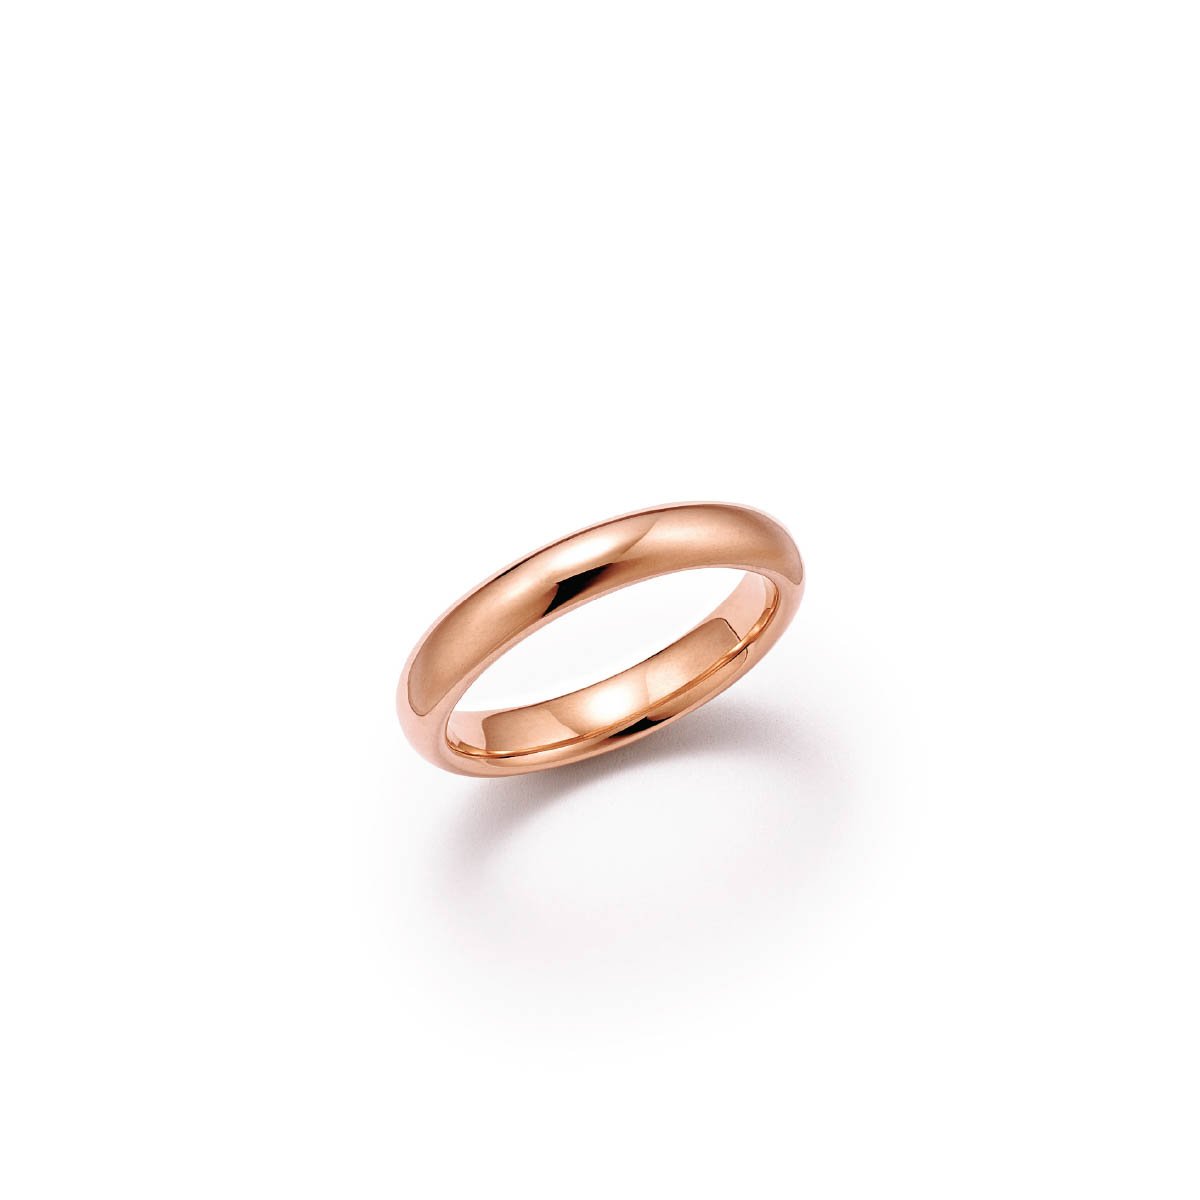 Sincerity Classic 18kt Certified Fairmined Ecological Rose Gold Wedding Ring - Full View